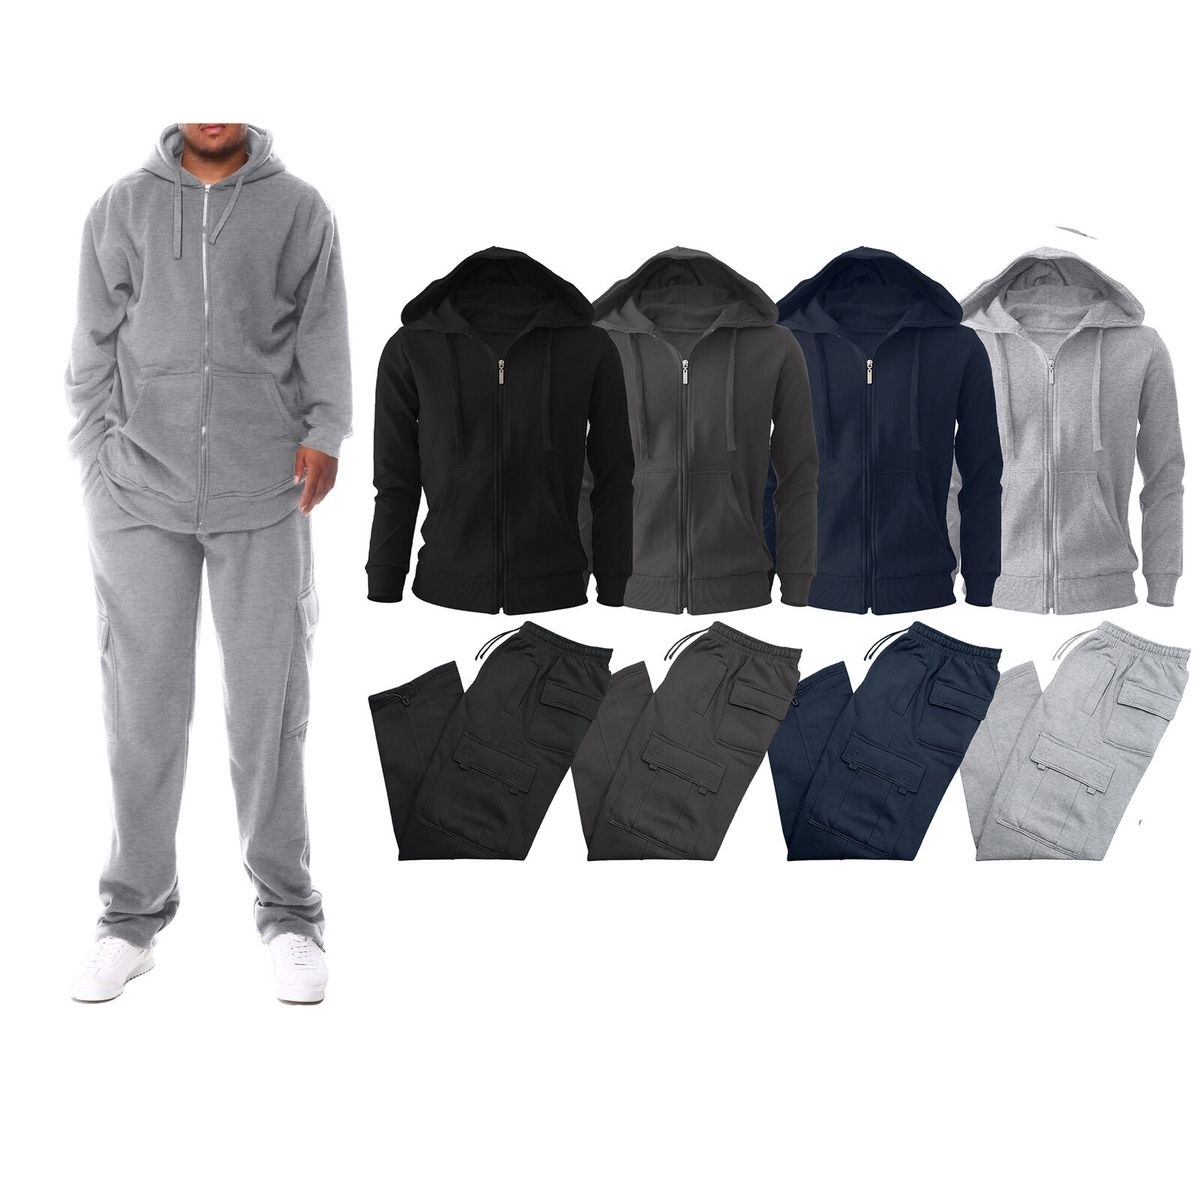 2-Pack: Men's Big & Tall Winter Warm Athletic Active Cozy Fleece Lined Multi-Pocket Full Zip Up Cargo Tracksuit - Grey, Small